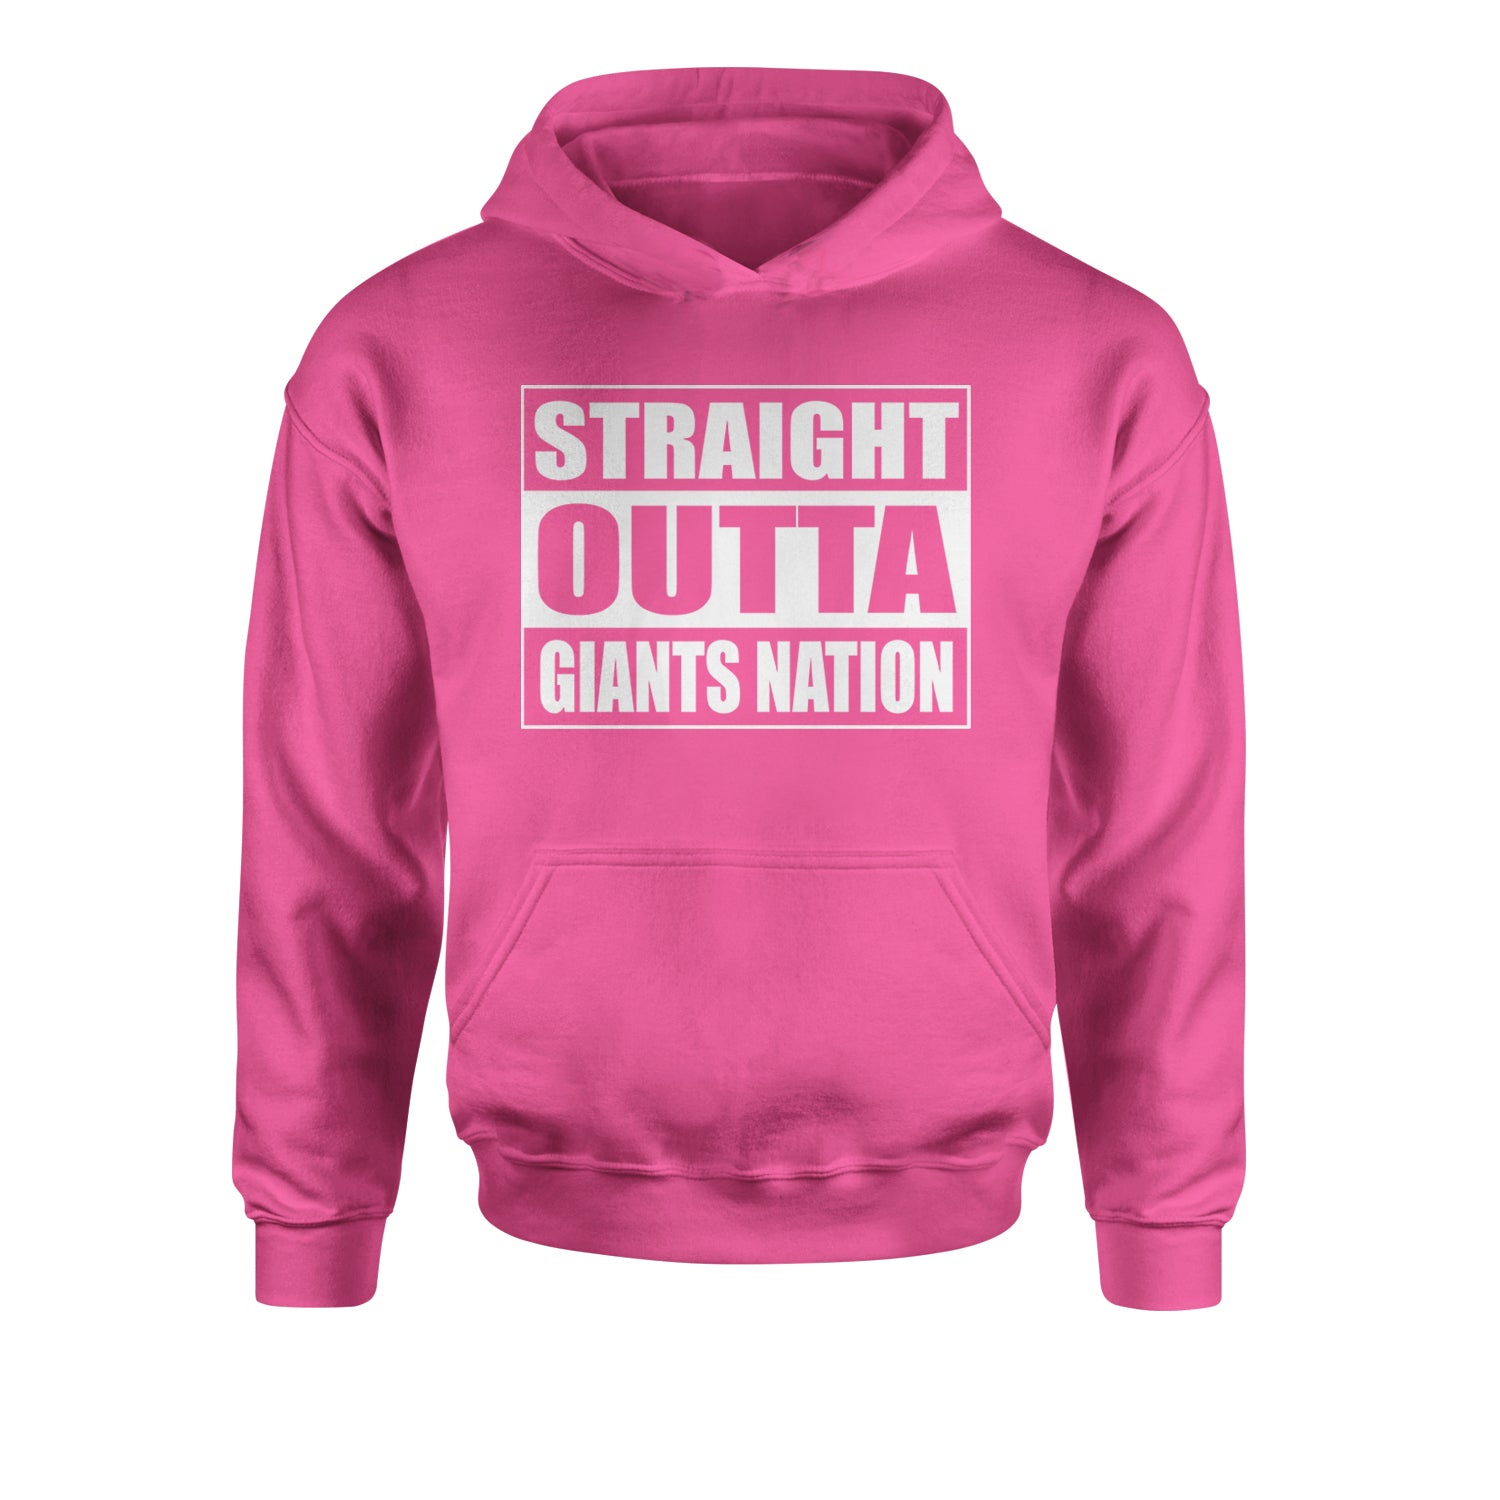 Straight Outta Giants Nation Youth-Sized Hoodie bleed, blue, football, giants, new, ny, york by Expression Tees